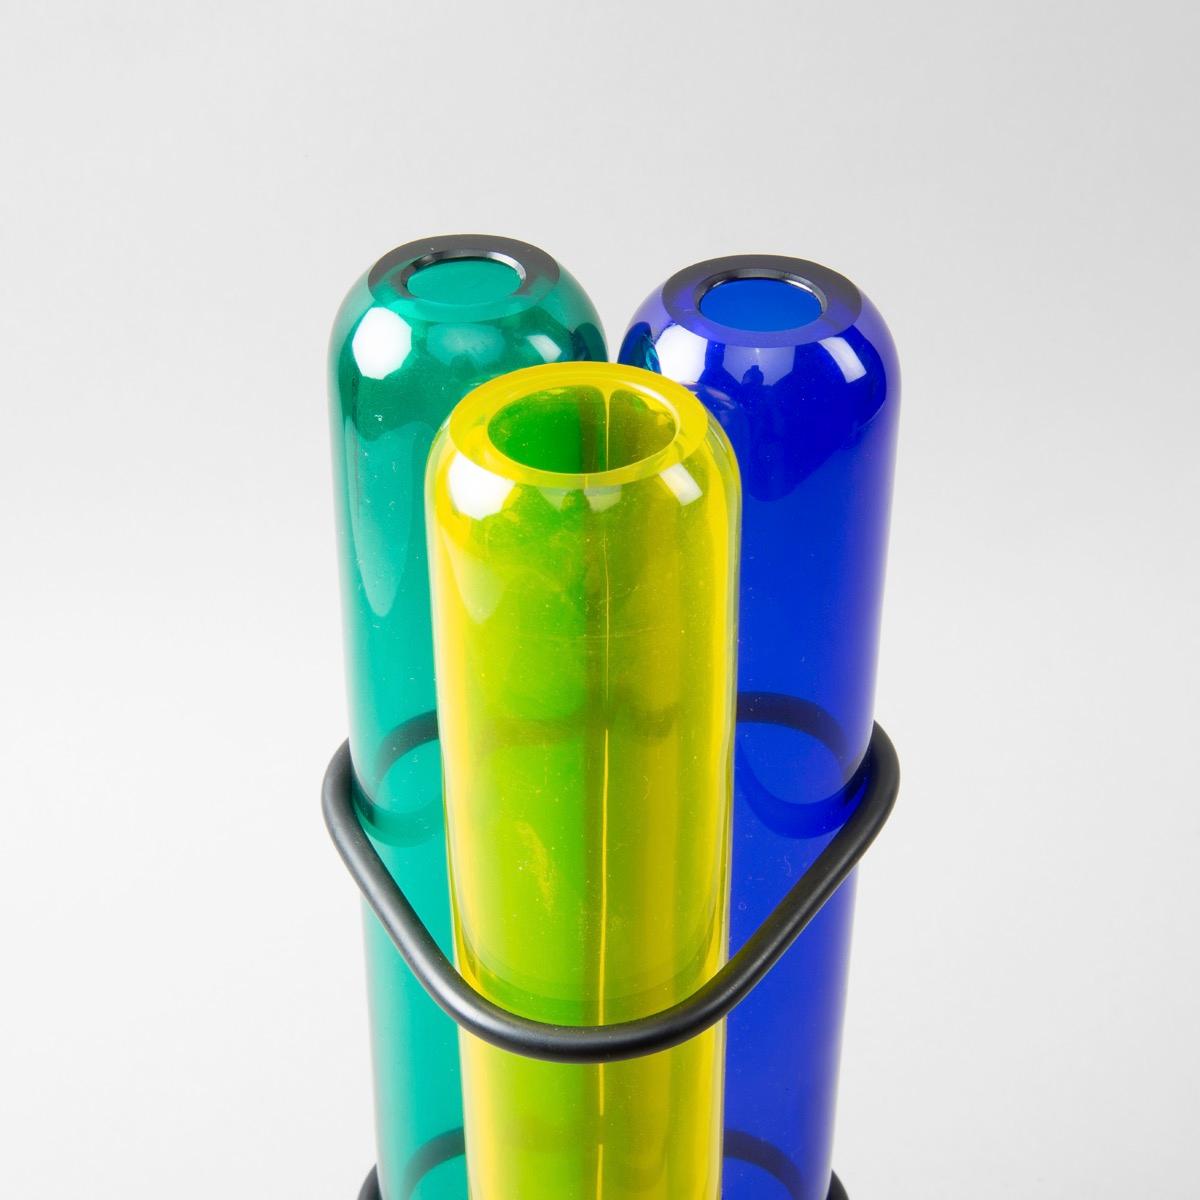 A rare vase designed by Pierre Charpin in 2003, manufactured the same year at Venini.

A very simple and efficient idea of 3 mouth blown glass (blue, green and yellow) tubes joined together with rubber o-rings.

The piece is signed with diamond